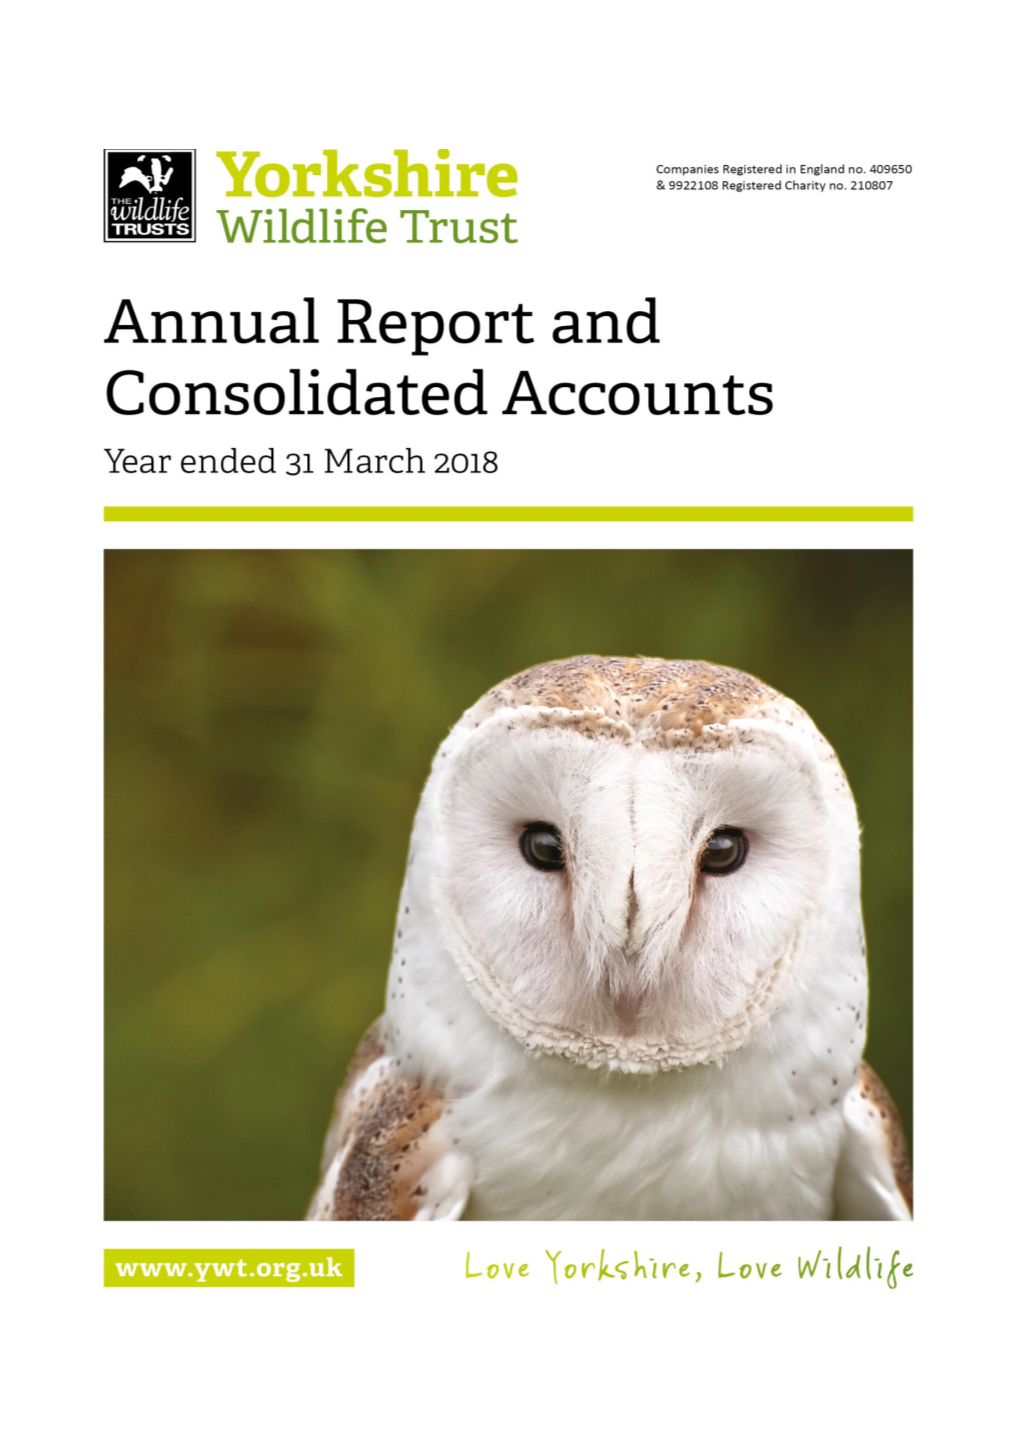 Annual Report and Accounts (2017-2018)